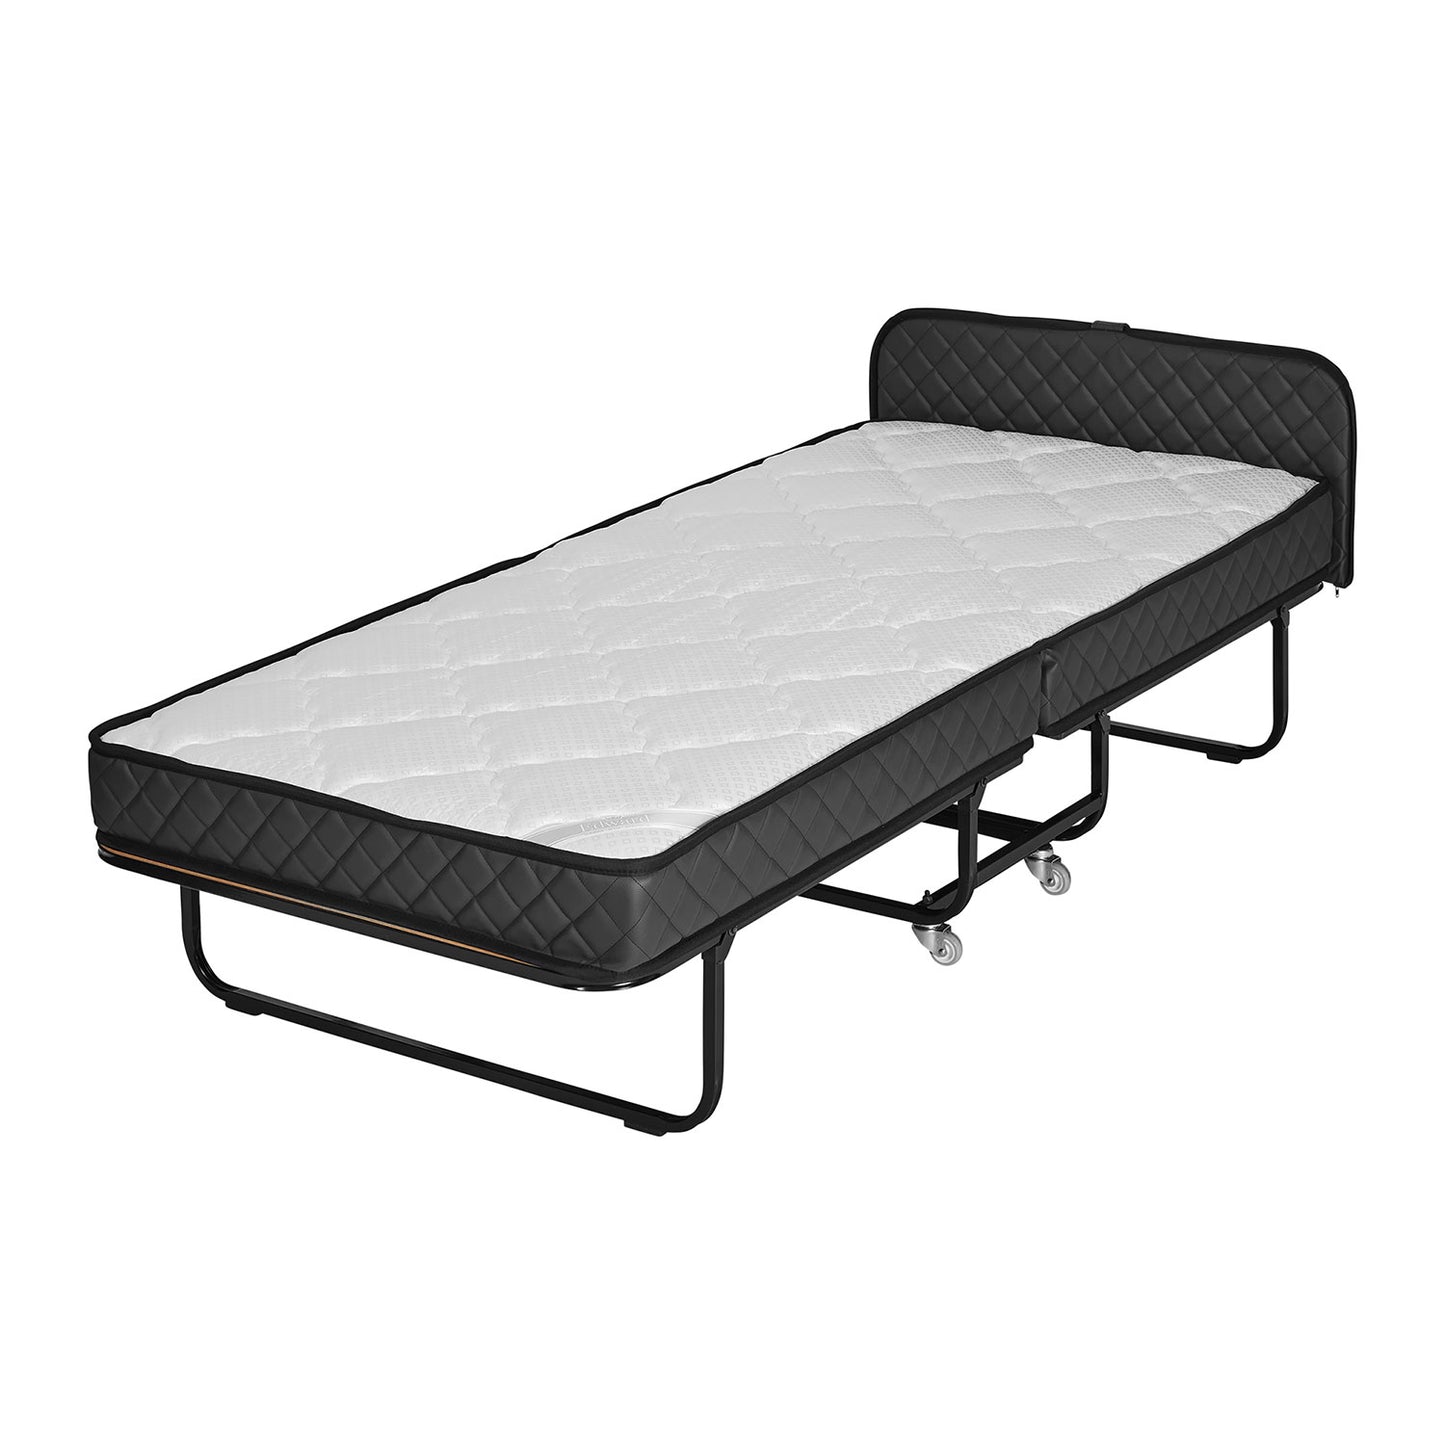 INCL. SHIPPING Edward - Rollaway folding bed Original PU leather, firm -